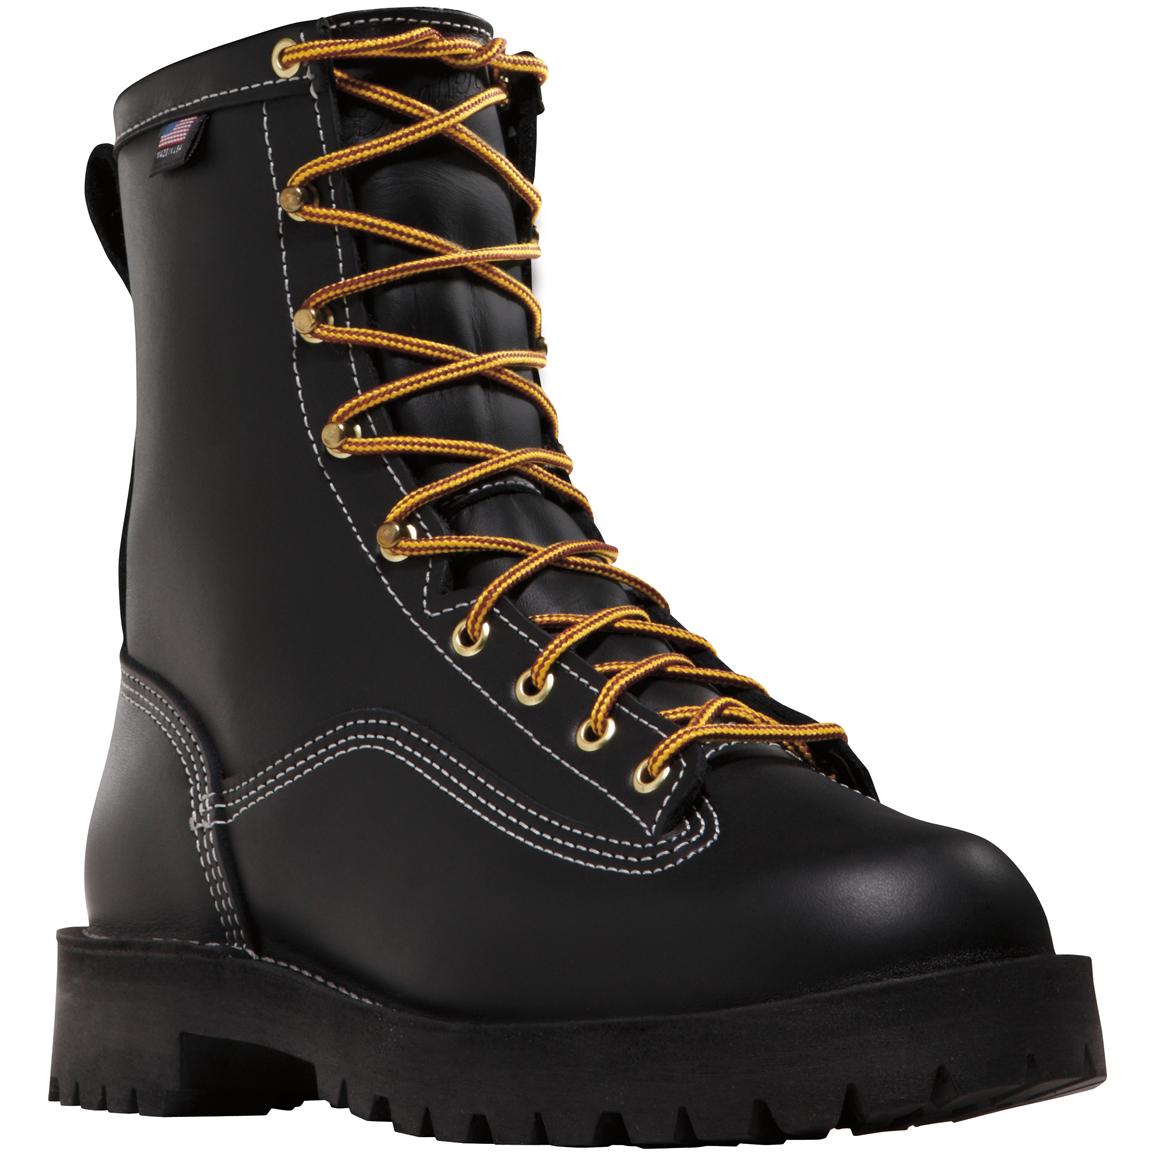 Danner Boots Clearance - Yu Boots